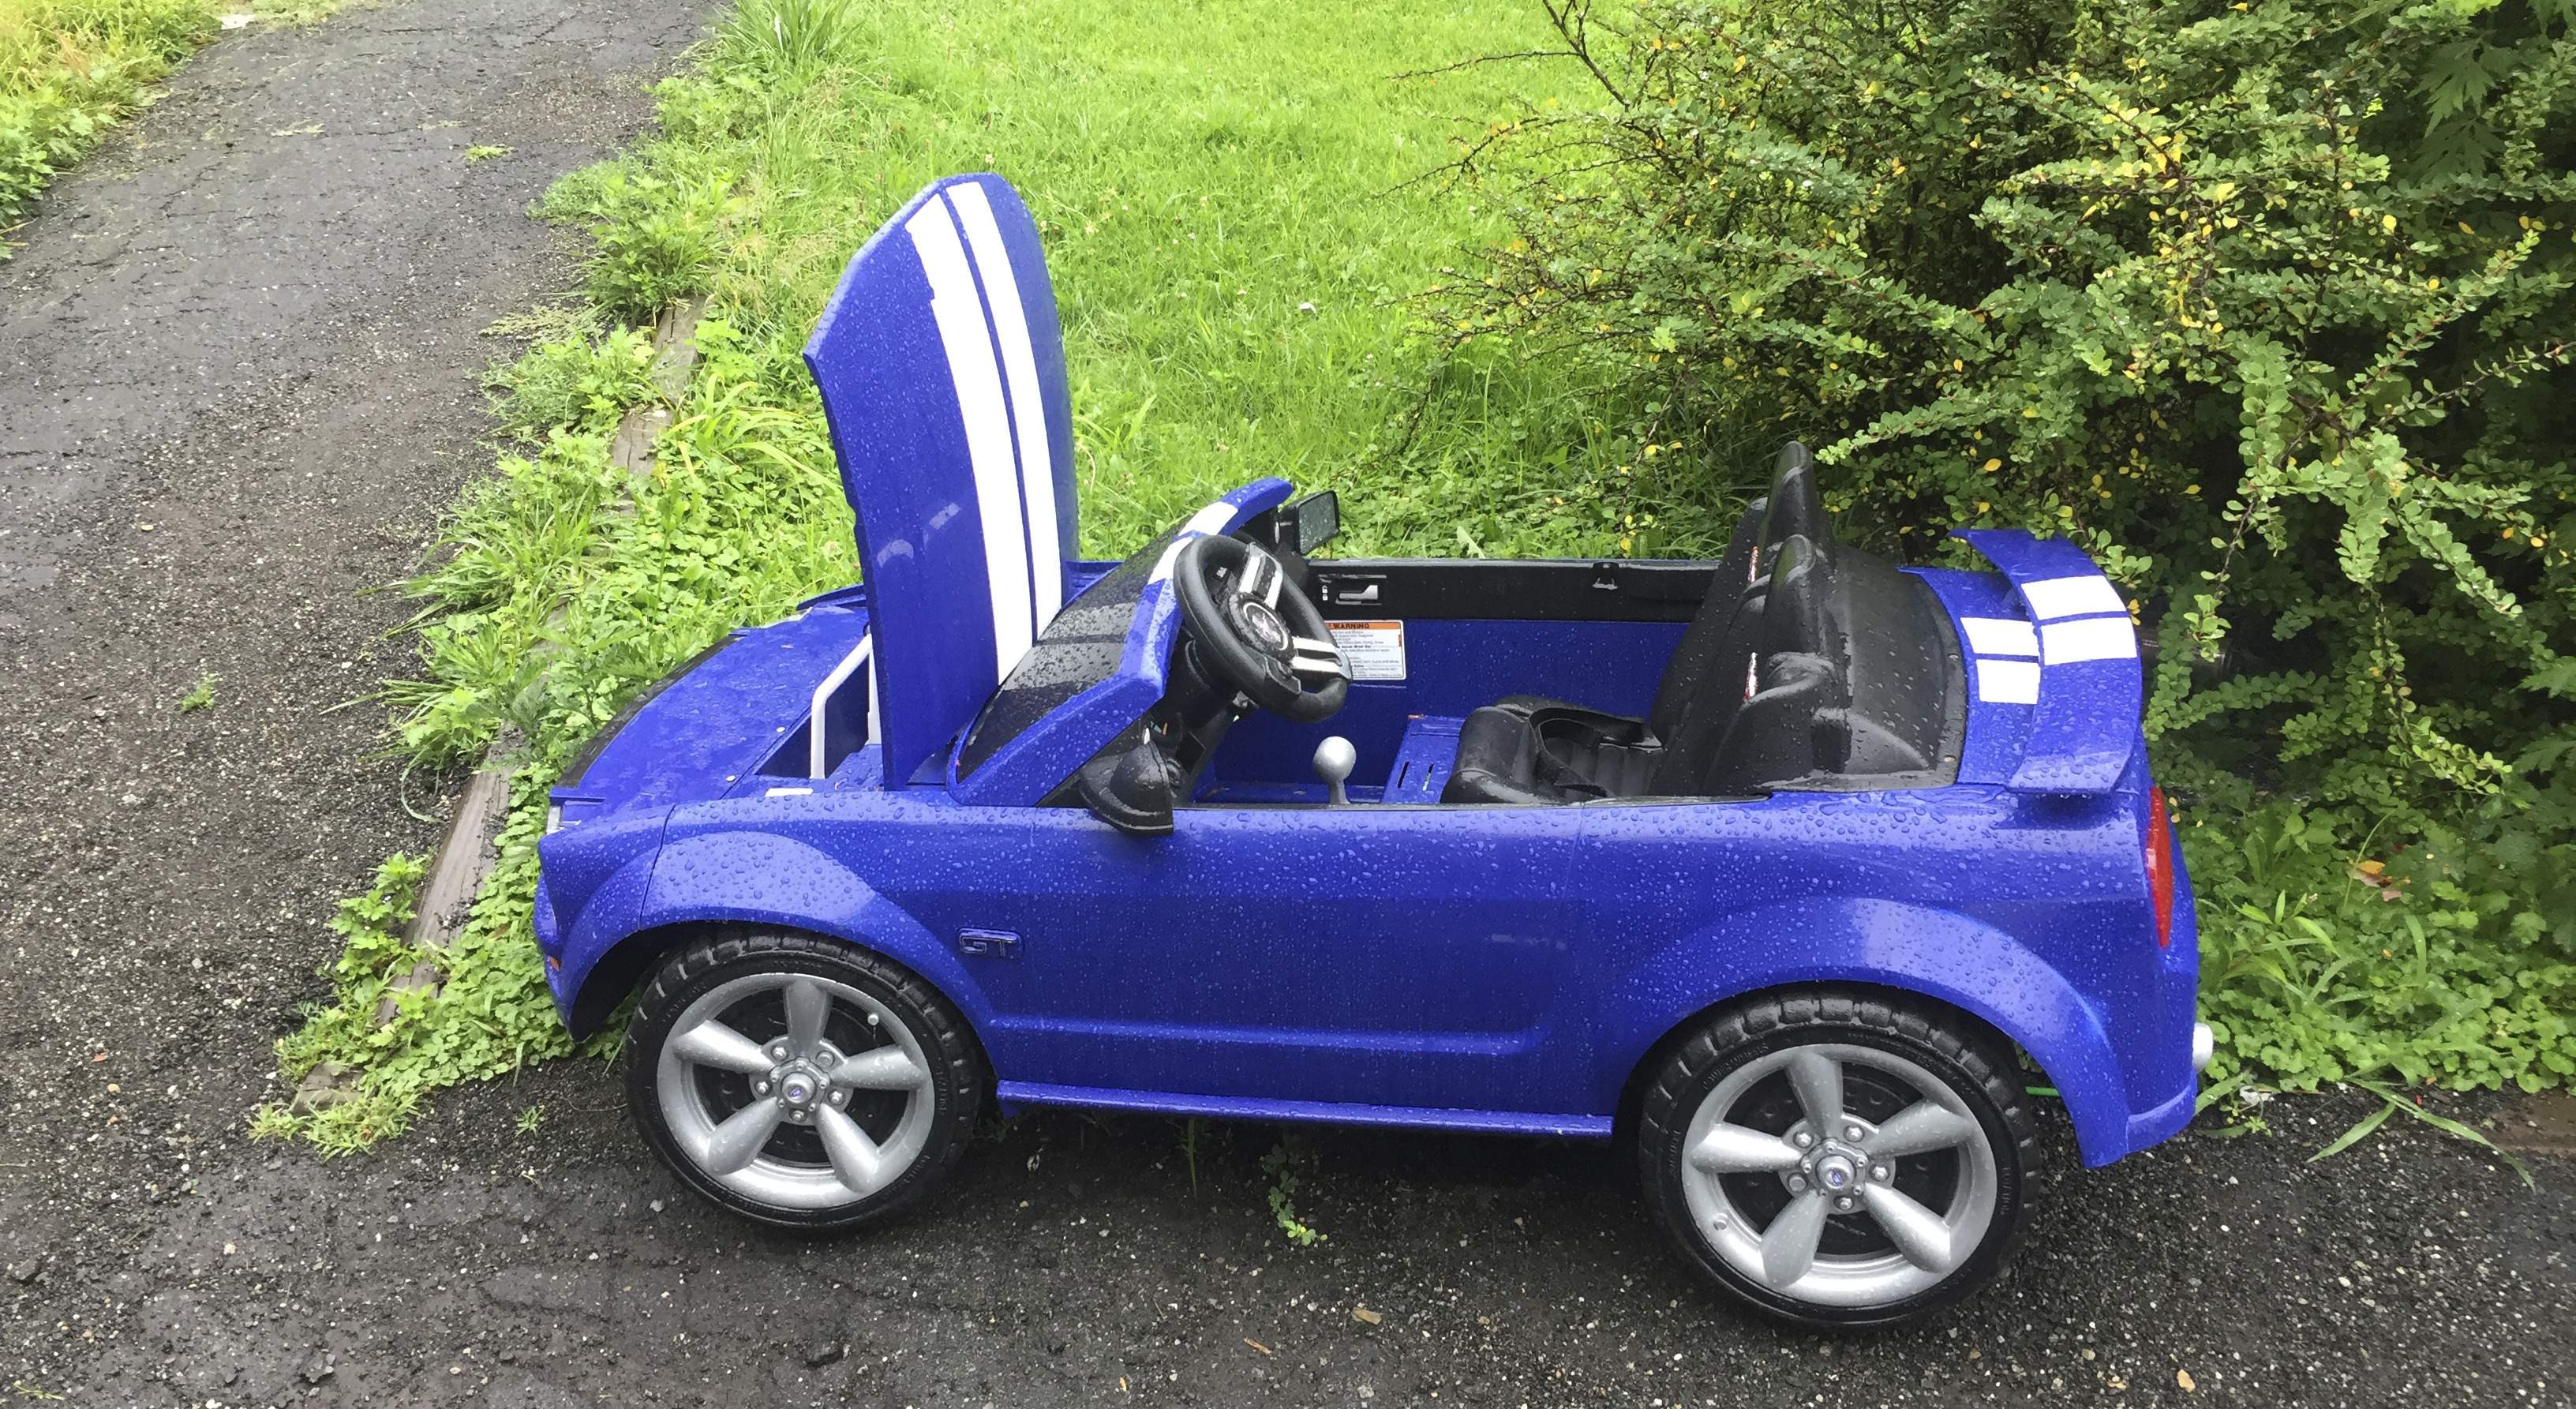 Stolen Toy Mustang in New Jersey Takes an Interesting Spin